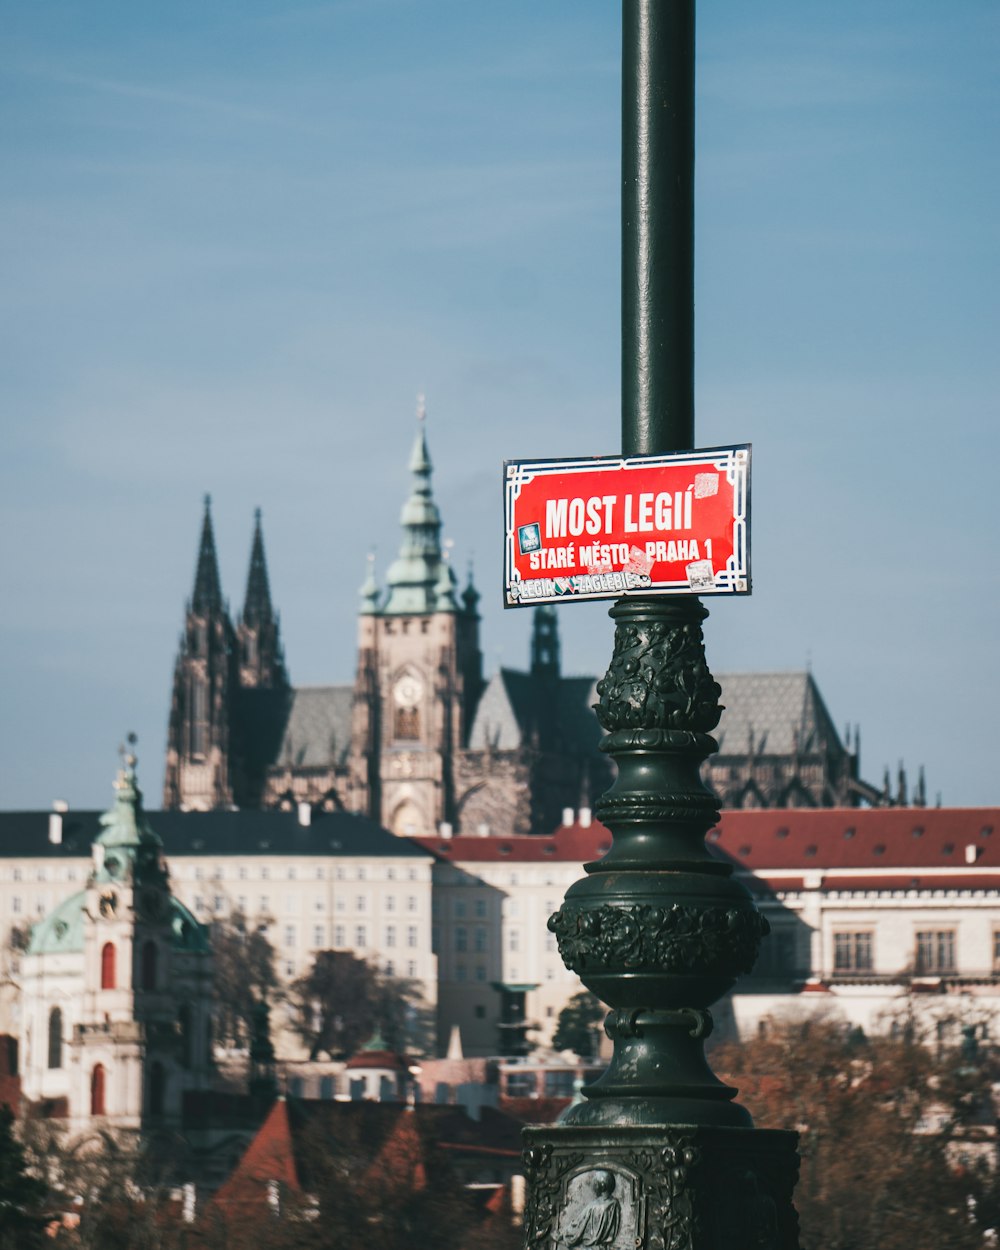 a street sign on a lamp post in front of a castle